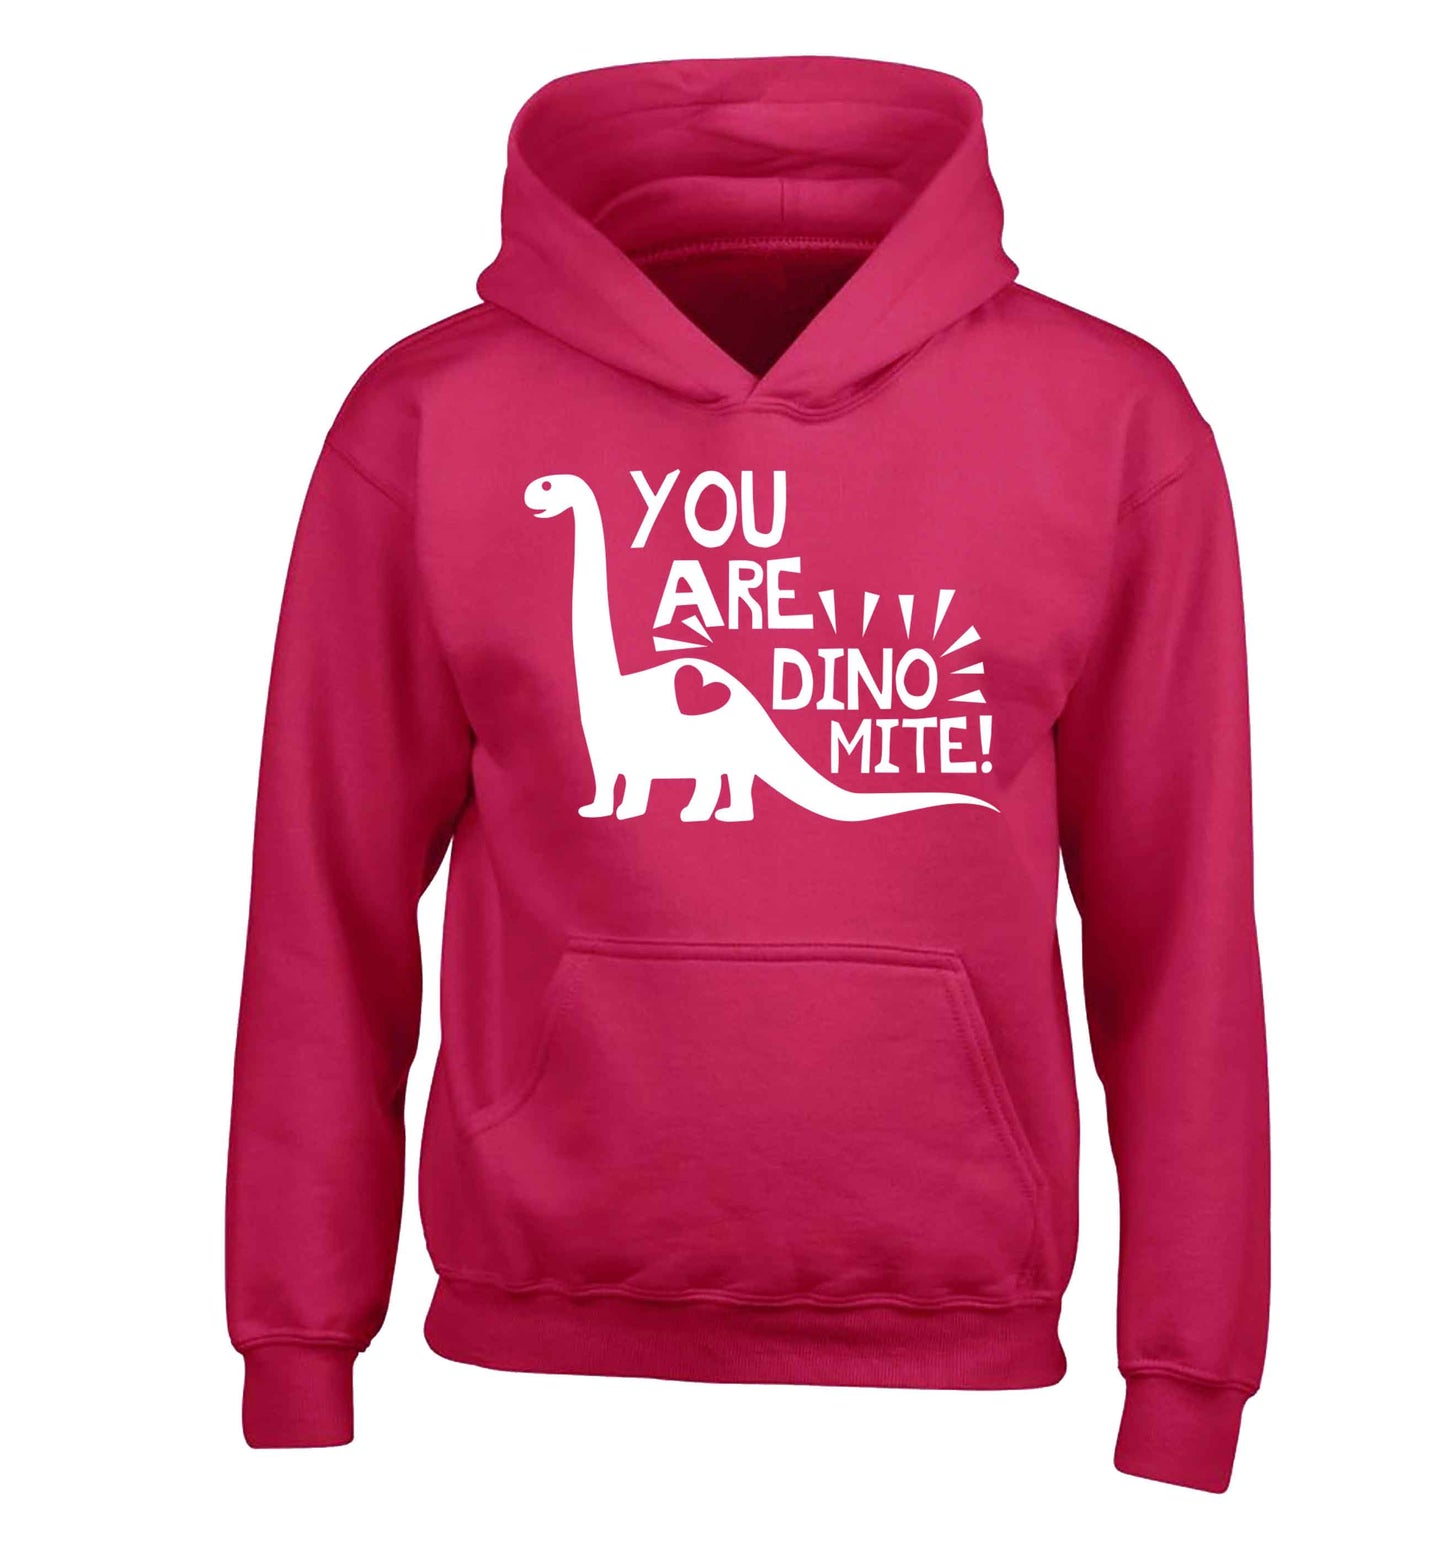 You are dinomite! children's pink hoodie 12-13 Years